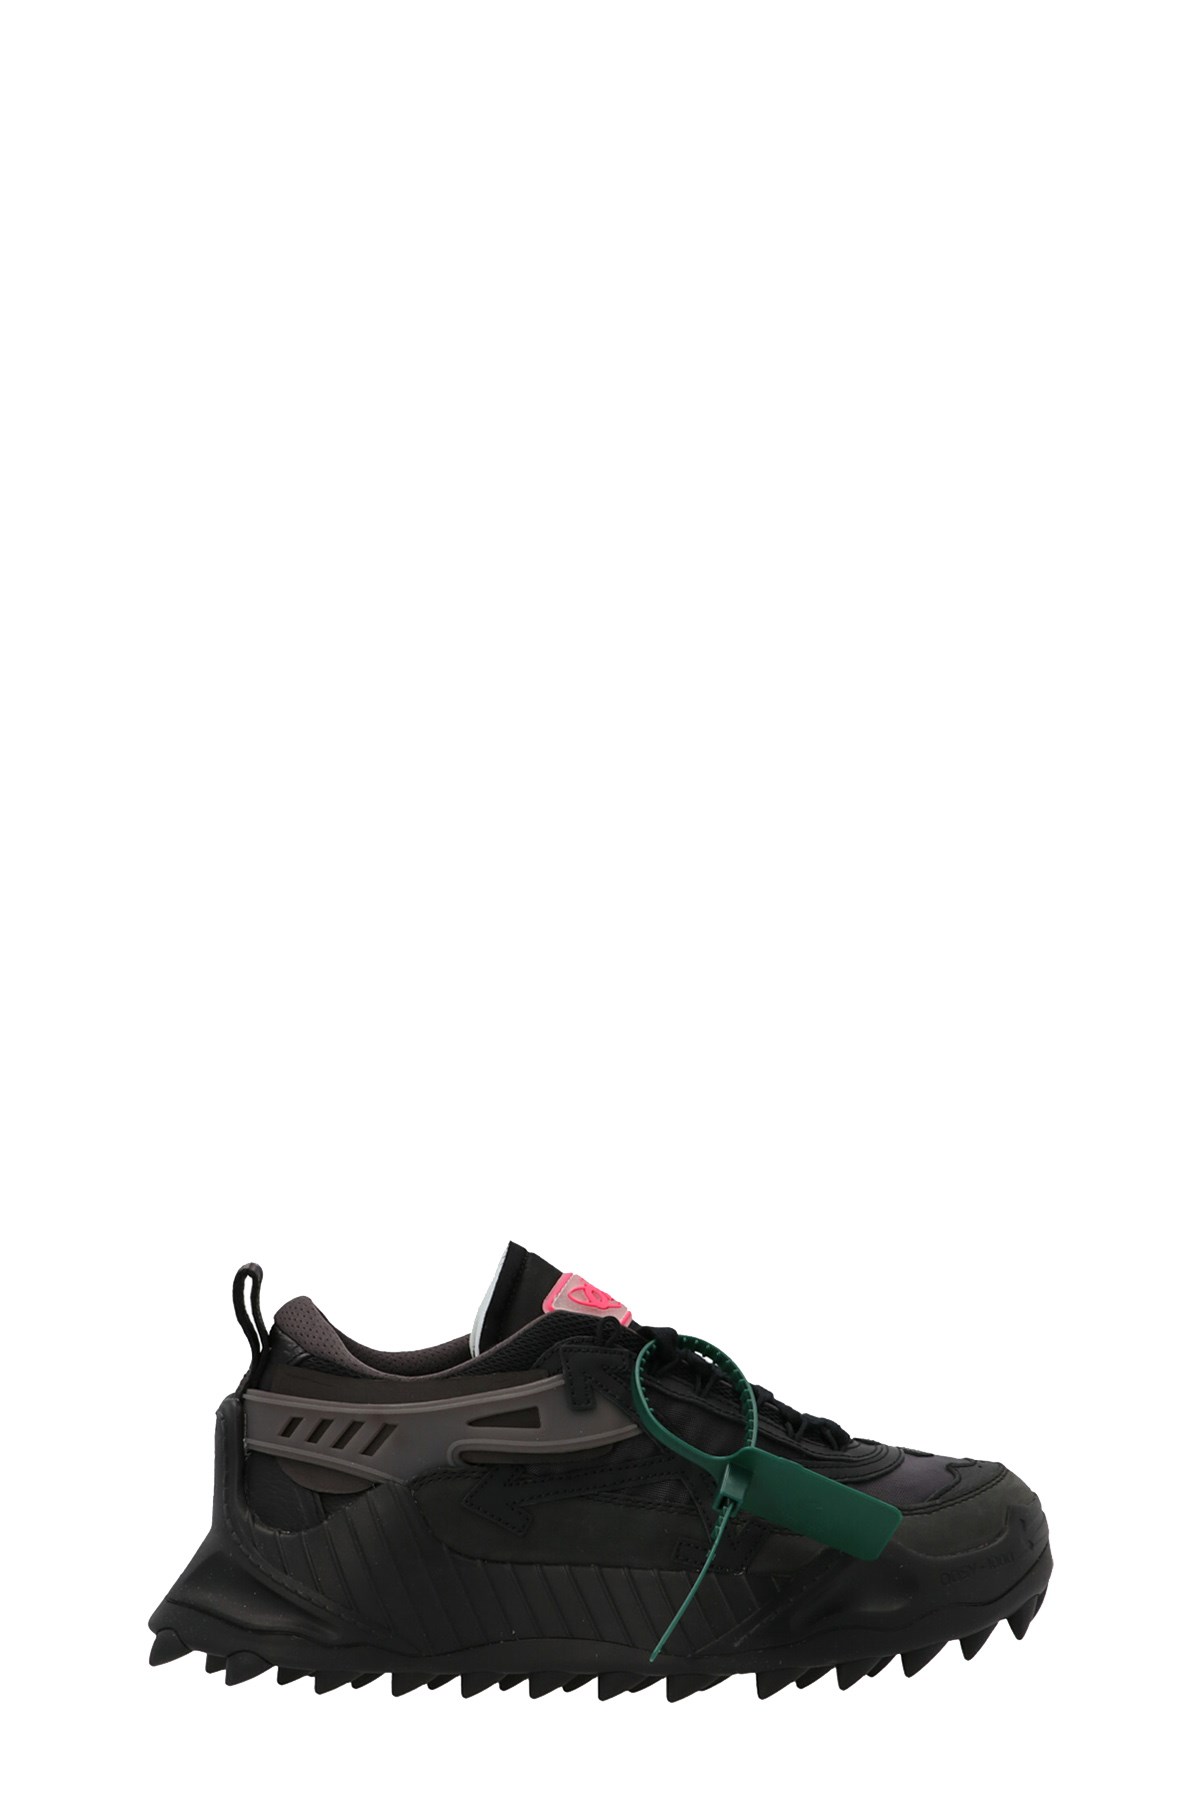 OFF-WHITE 'Odsy’ Sneakers